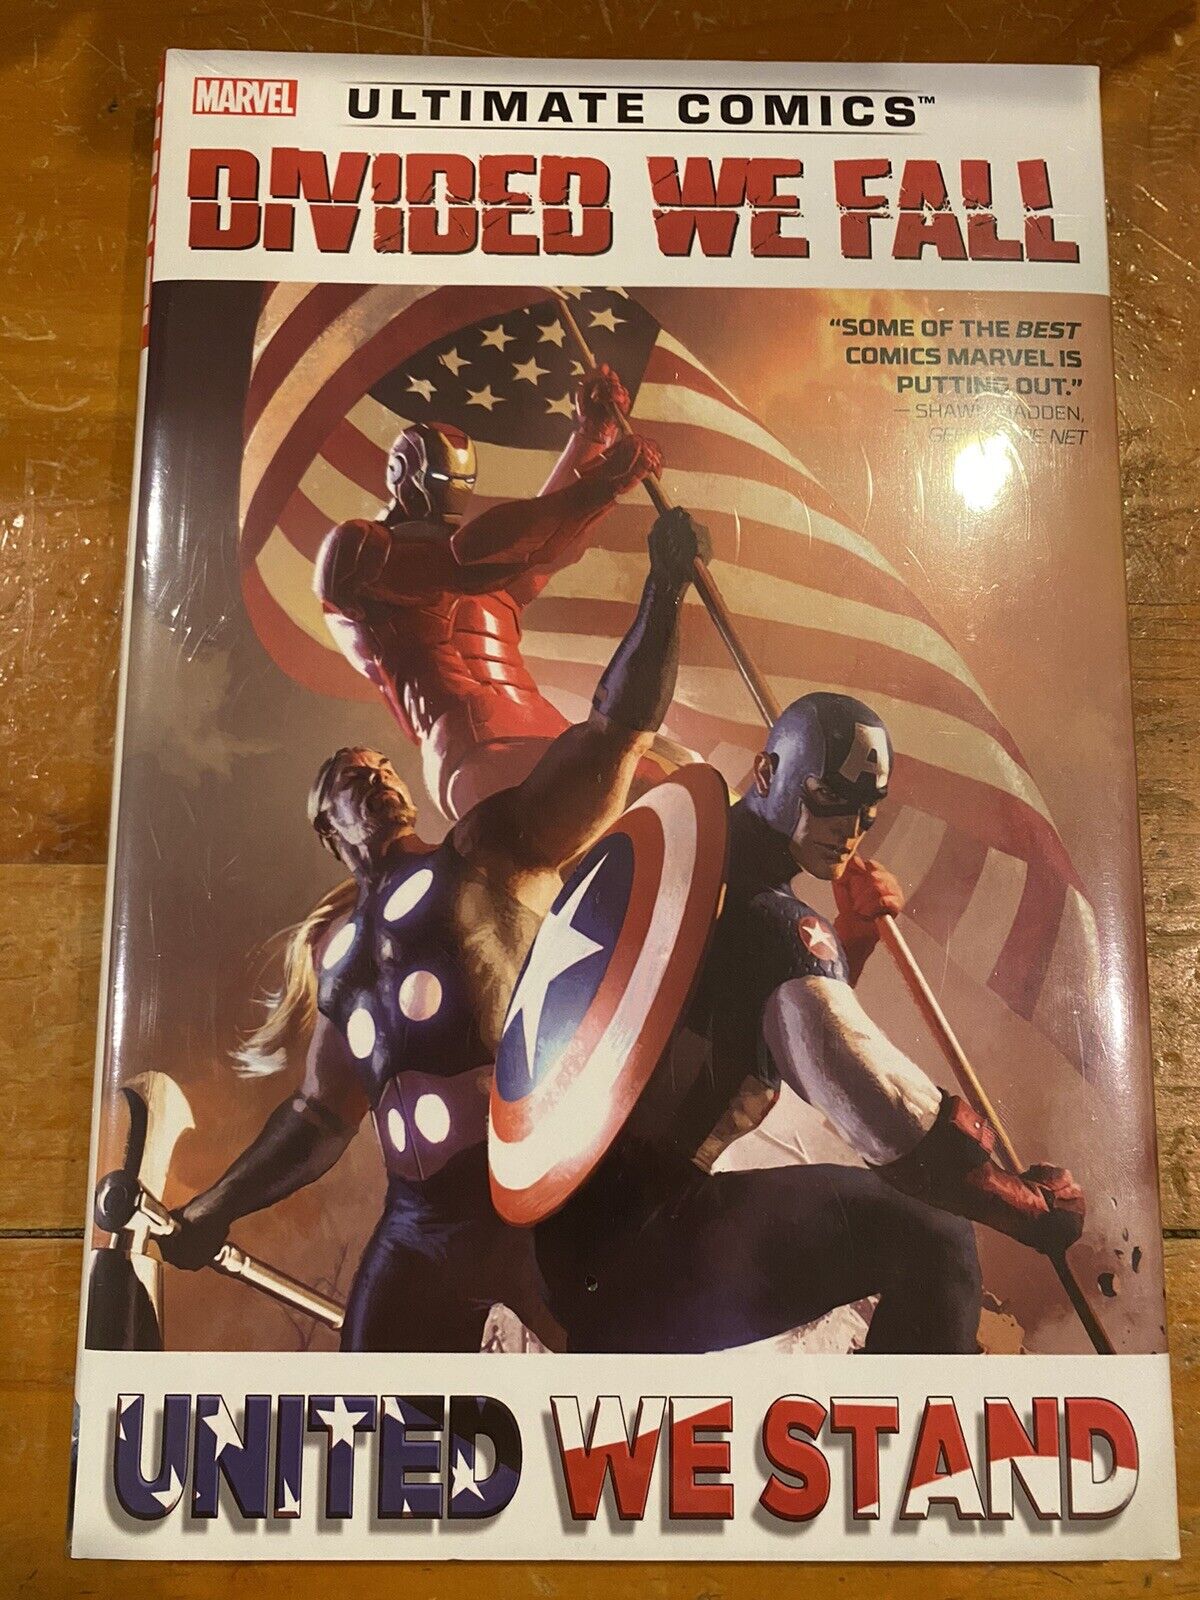 Ultimate Comics Divided We Fall, United We Stand (Marvel, January 2013)